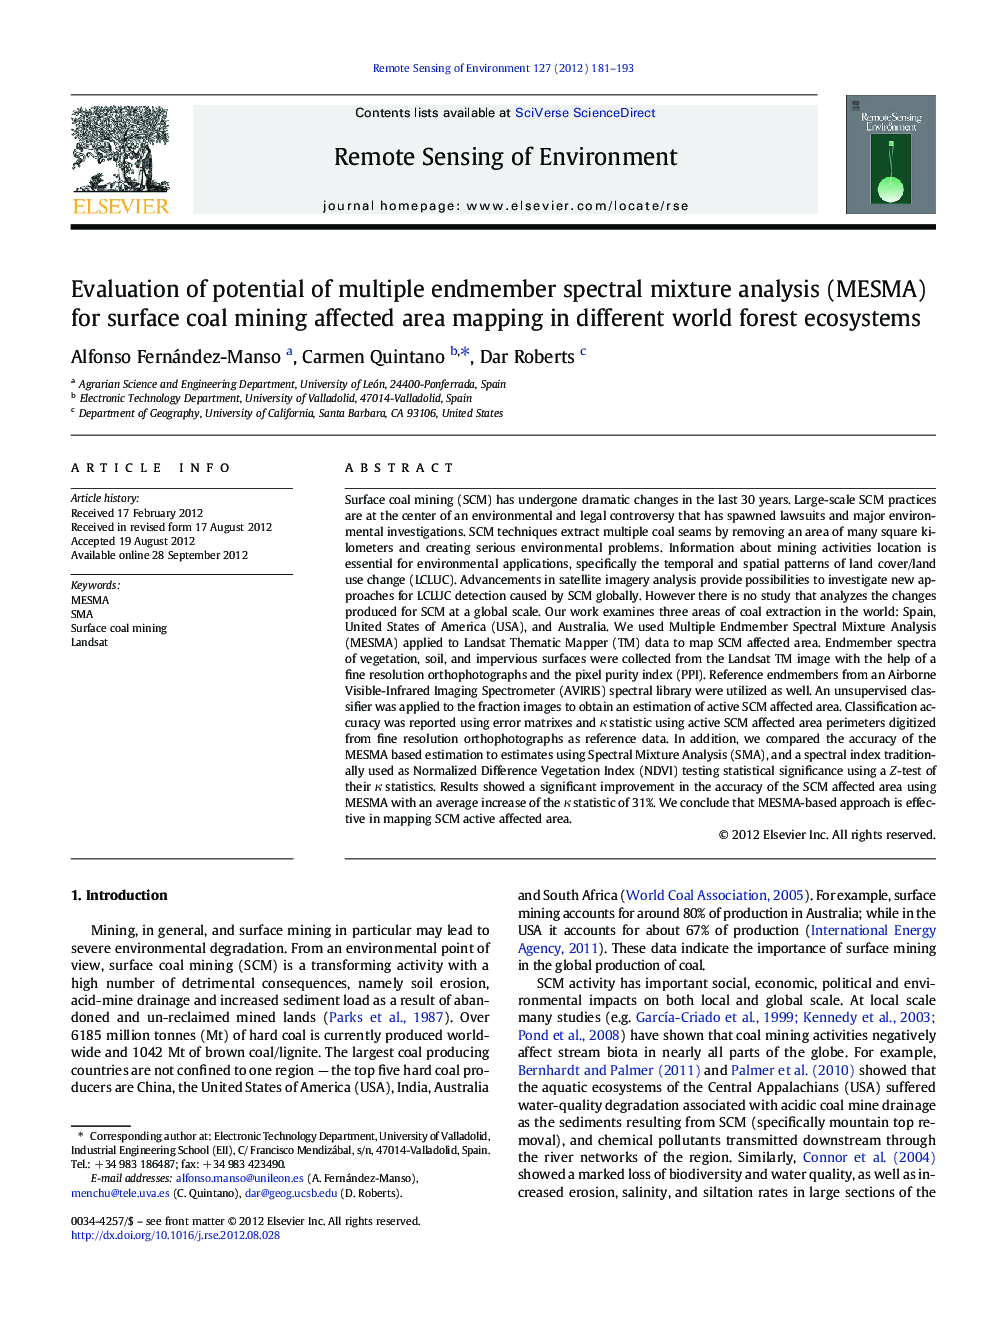 Evaluation of potential of multiple endmember spectral mixture analysis (MESMA) for surface coal mining affected area mapping in different world forest ecosystems